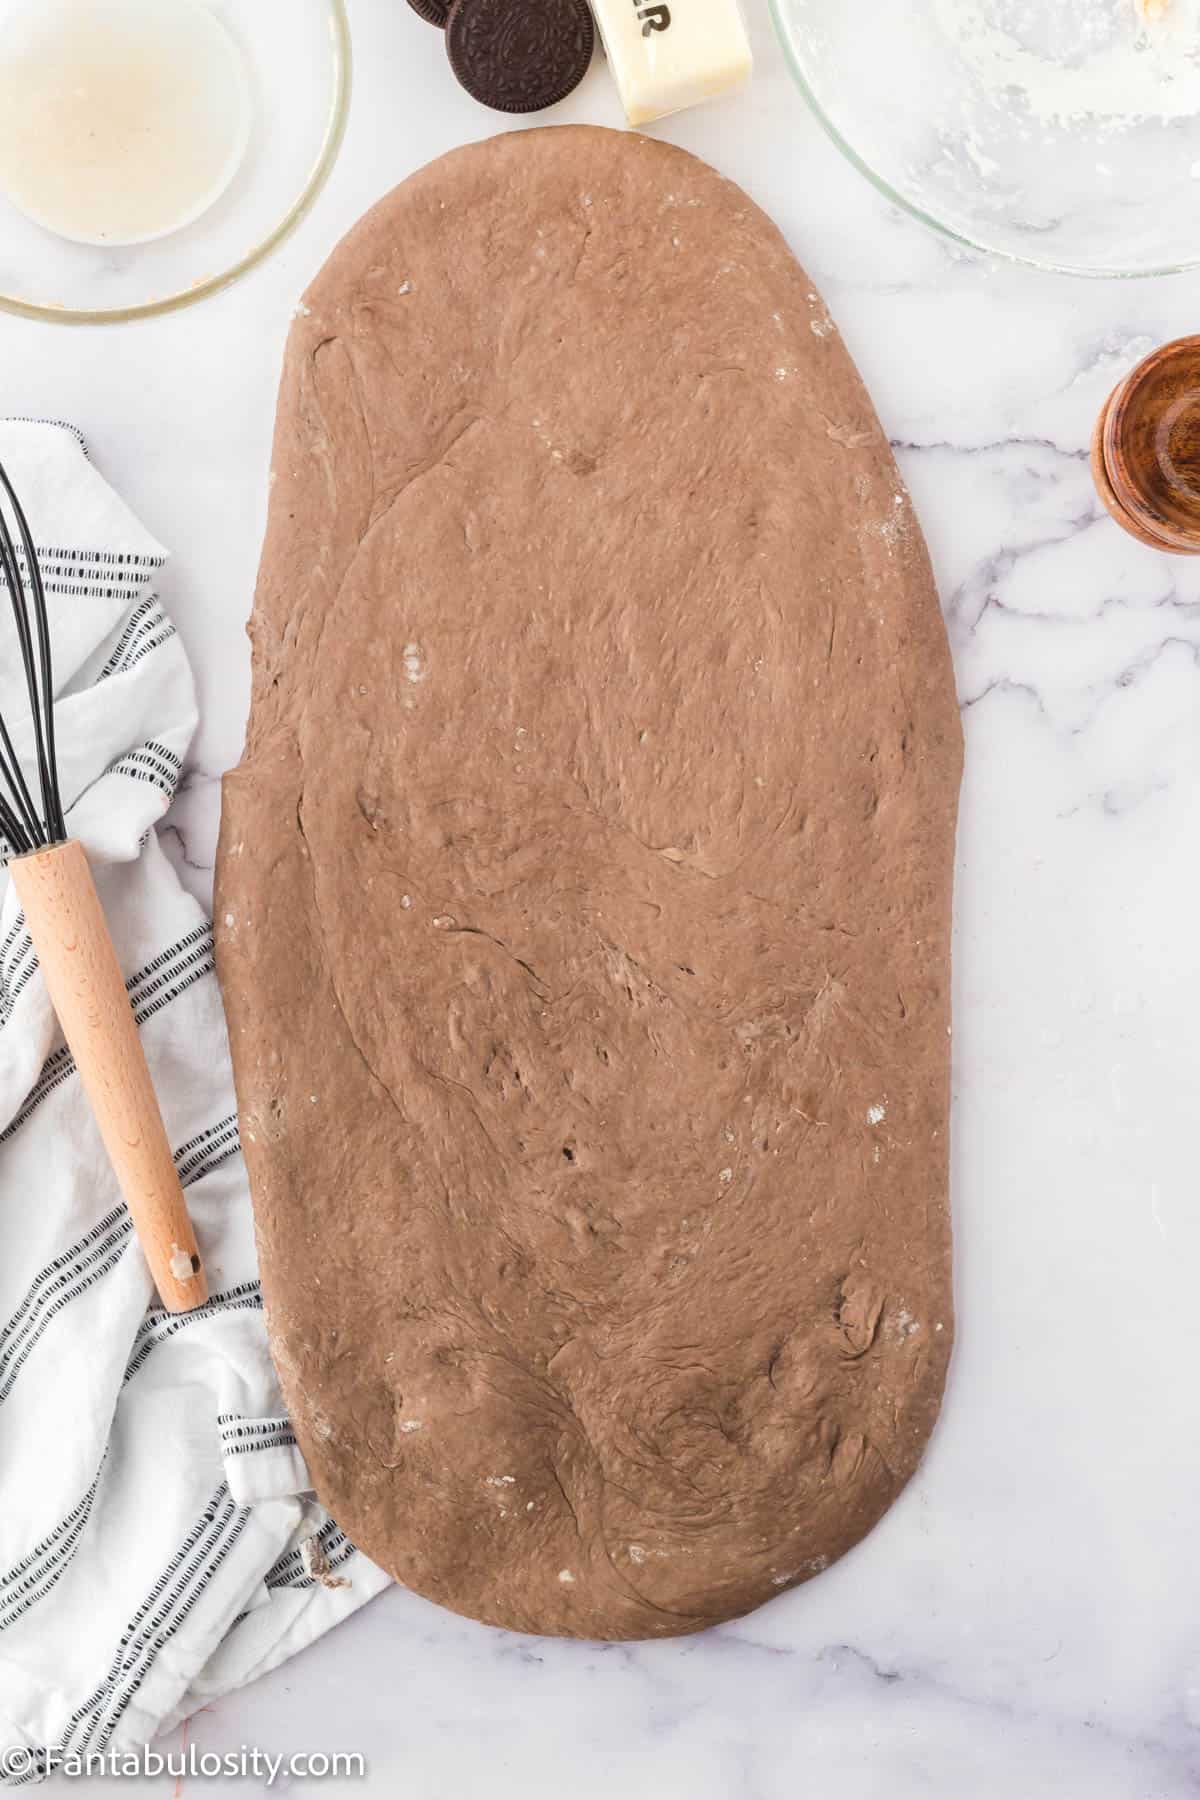 After resting, roll dough out into a large rectangle.